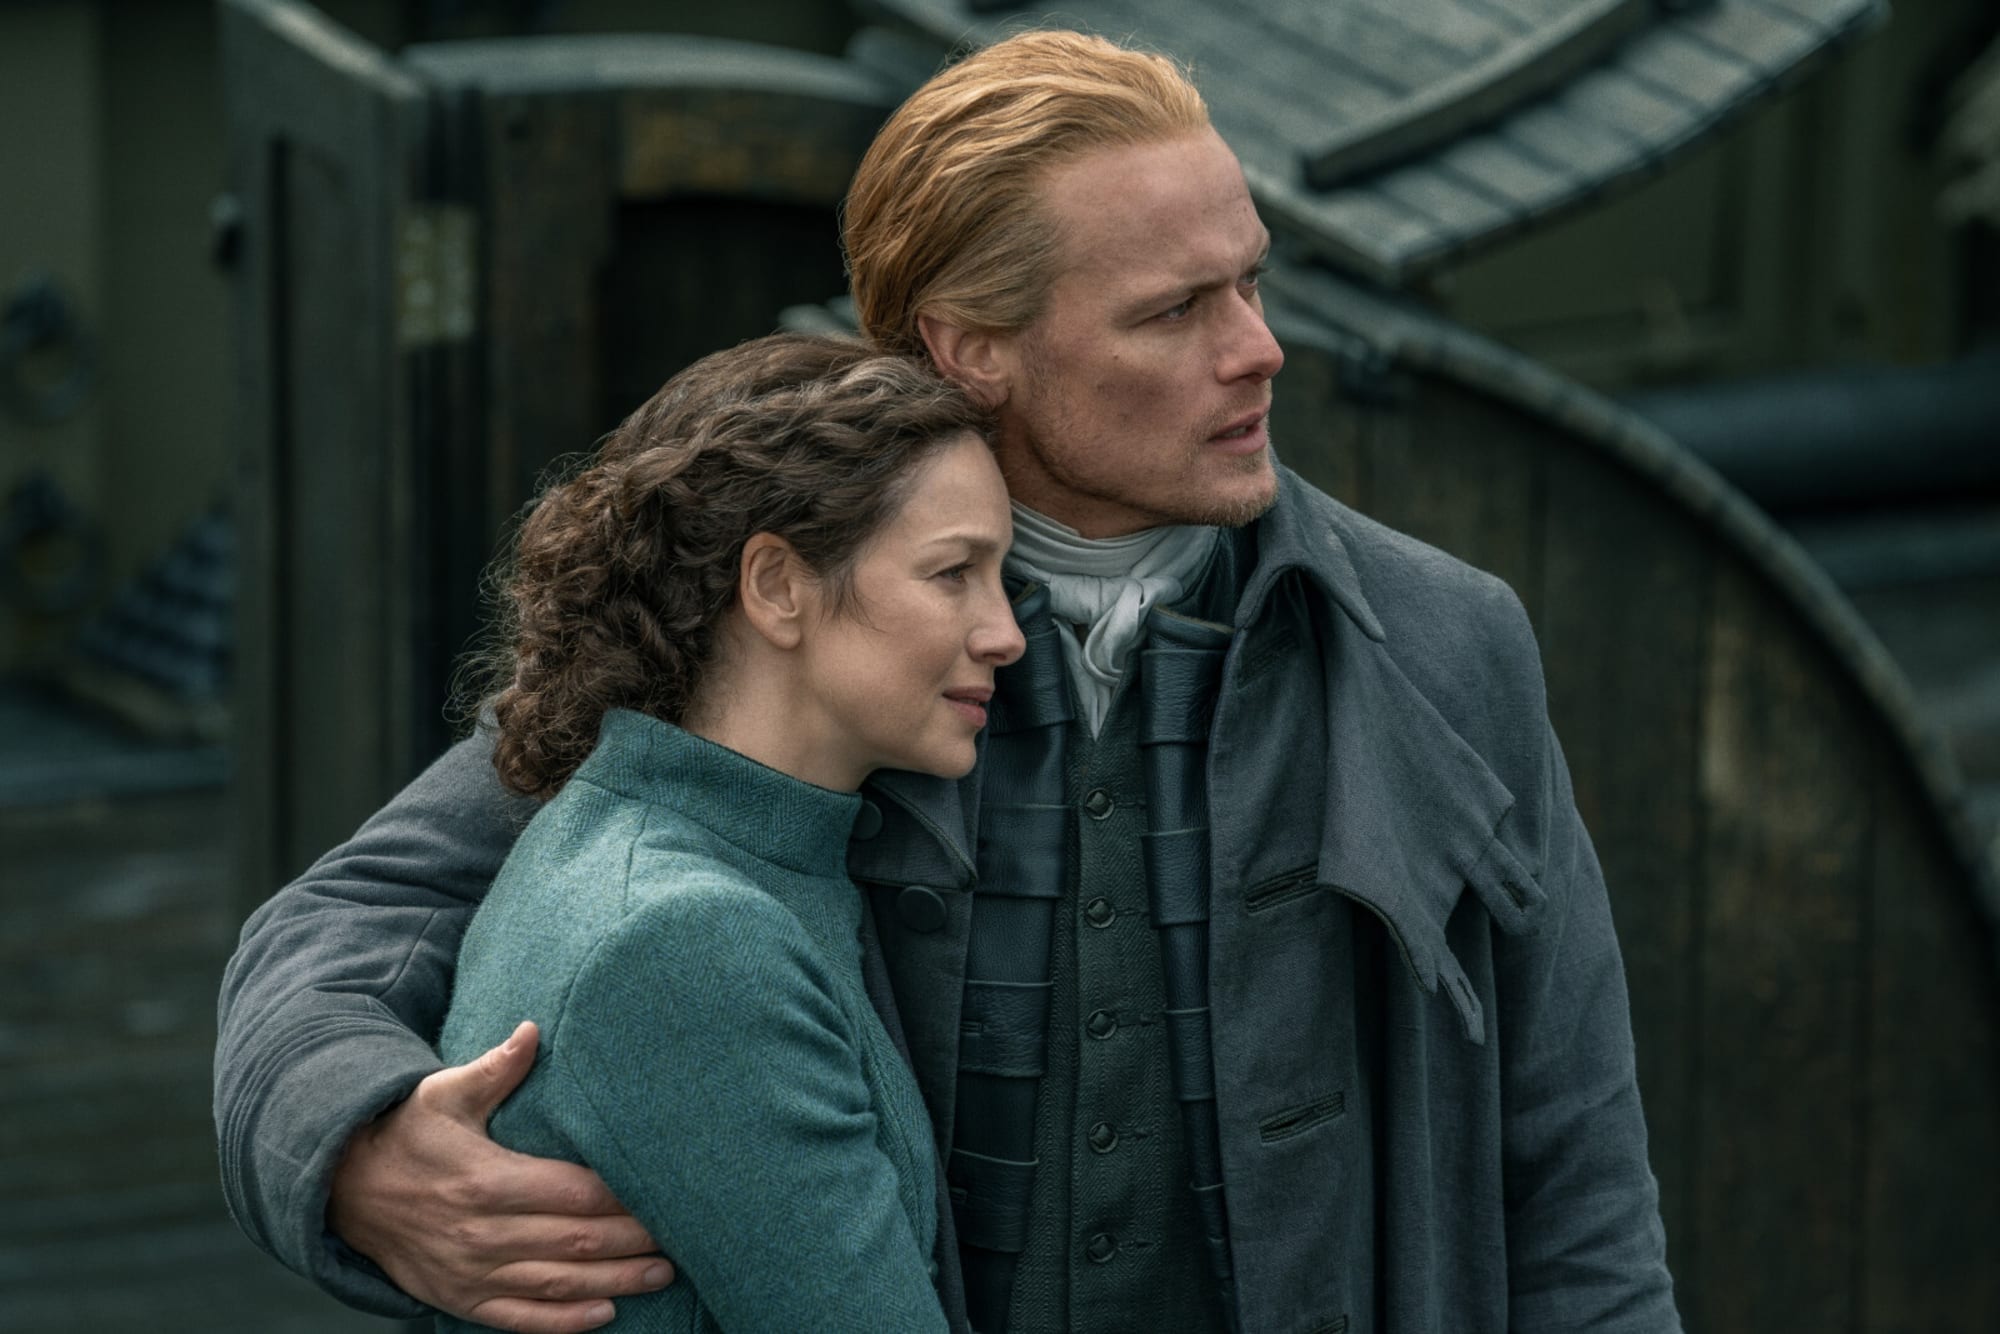 Could the Outlander series work Book 10 into a movie?